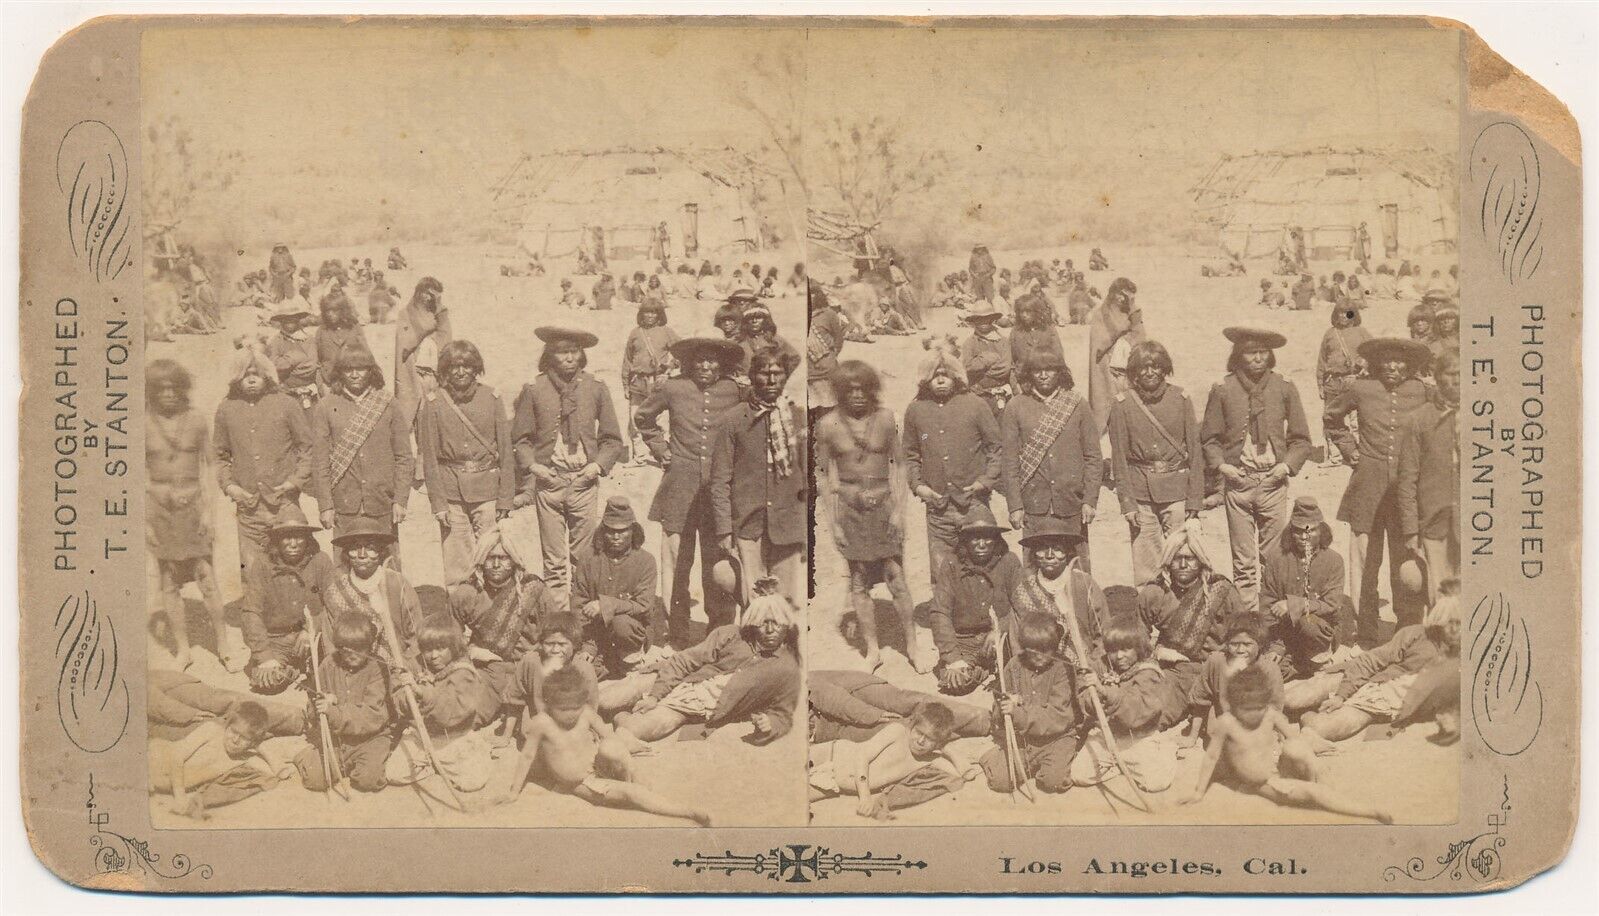 INDIANS SV - Los Angeles - Indian Group - TE Stanton 1880s